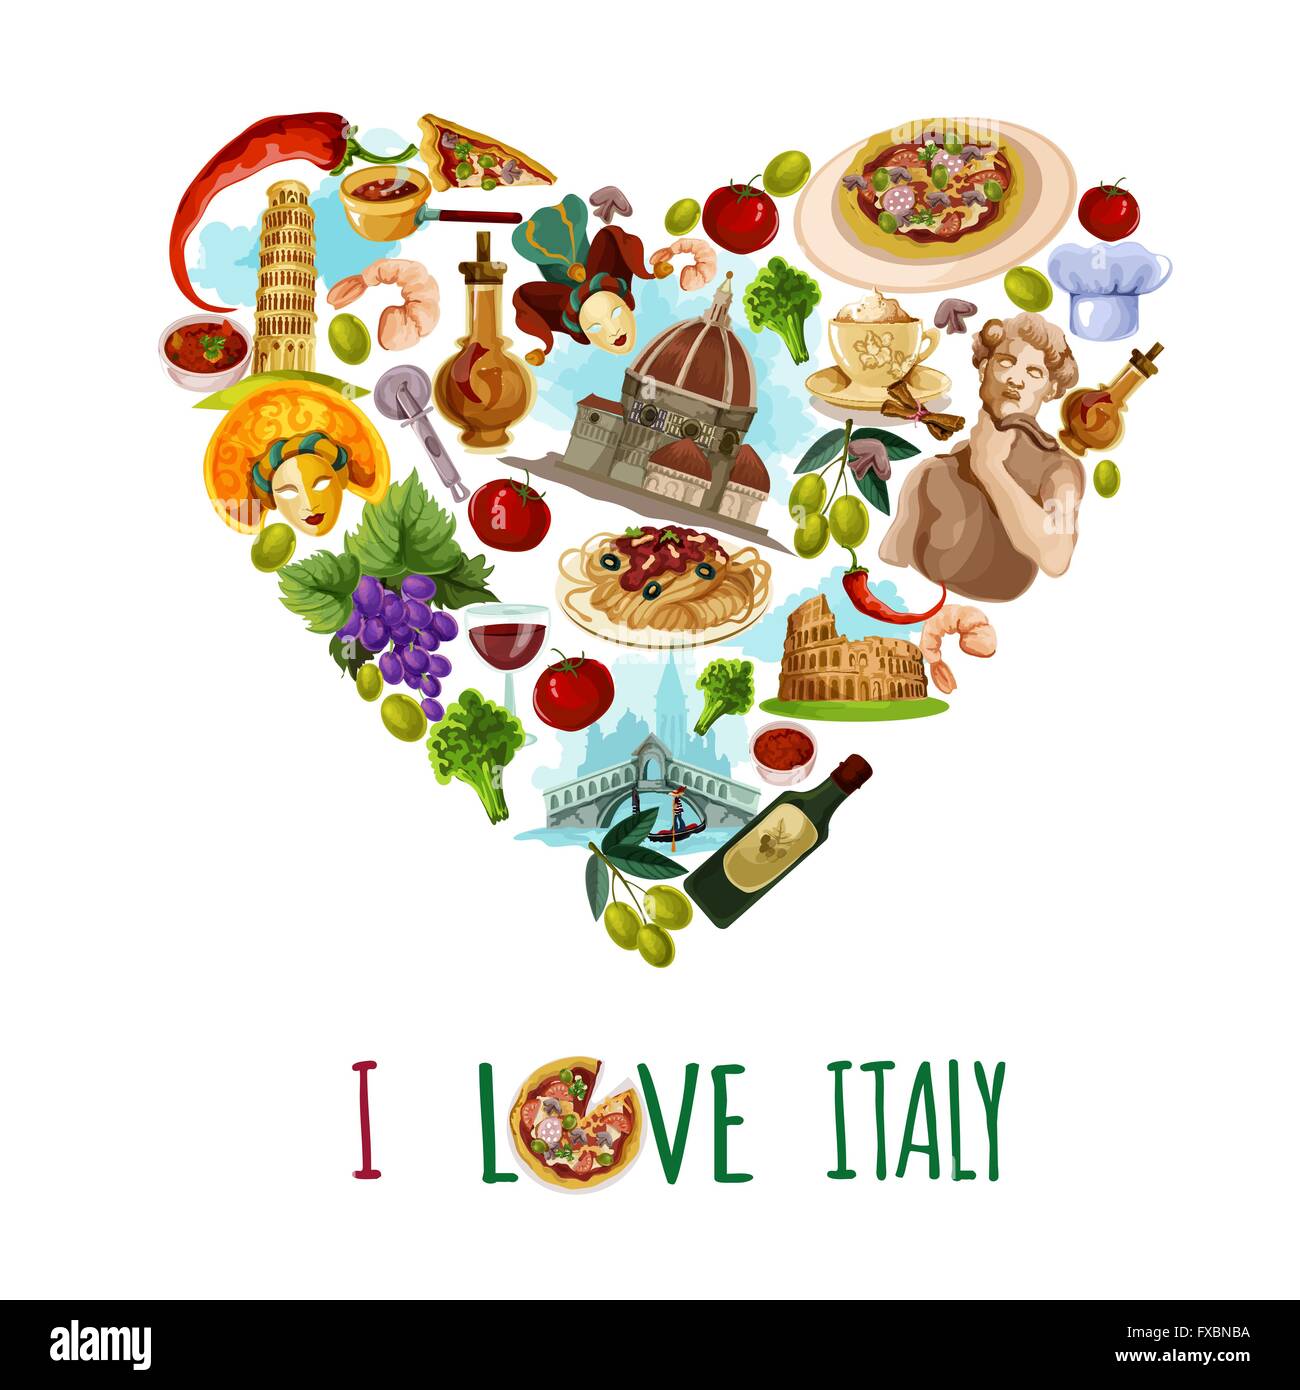 Italy Touristic Poster Stock Vector